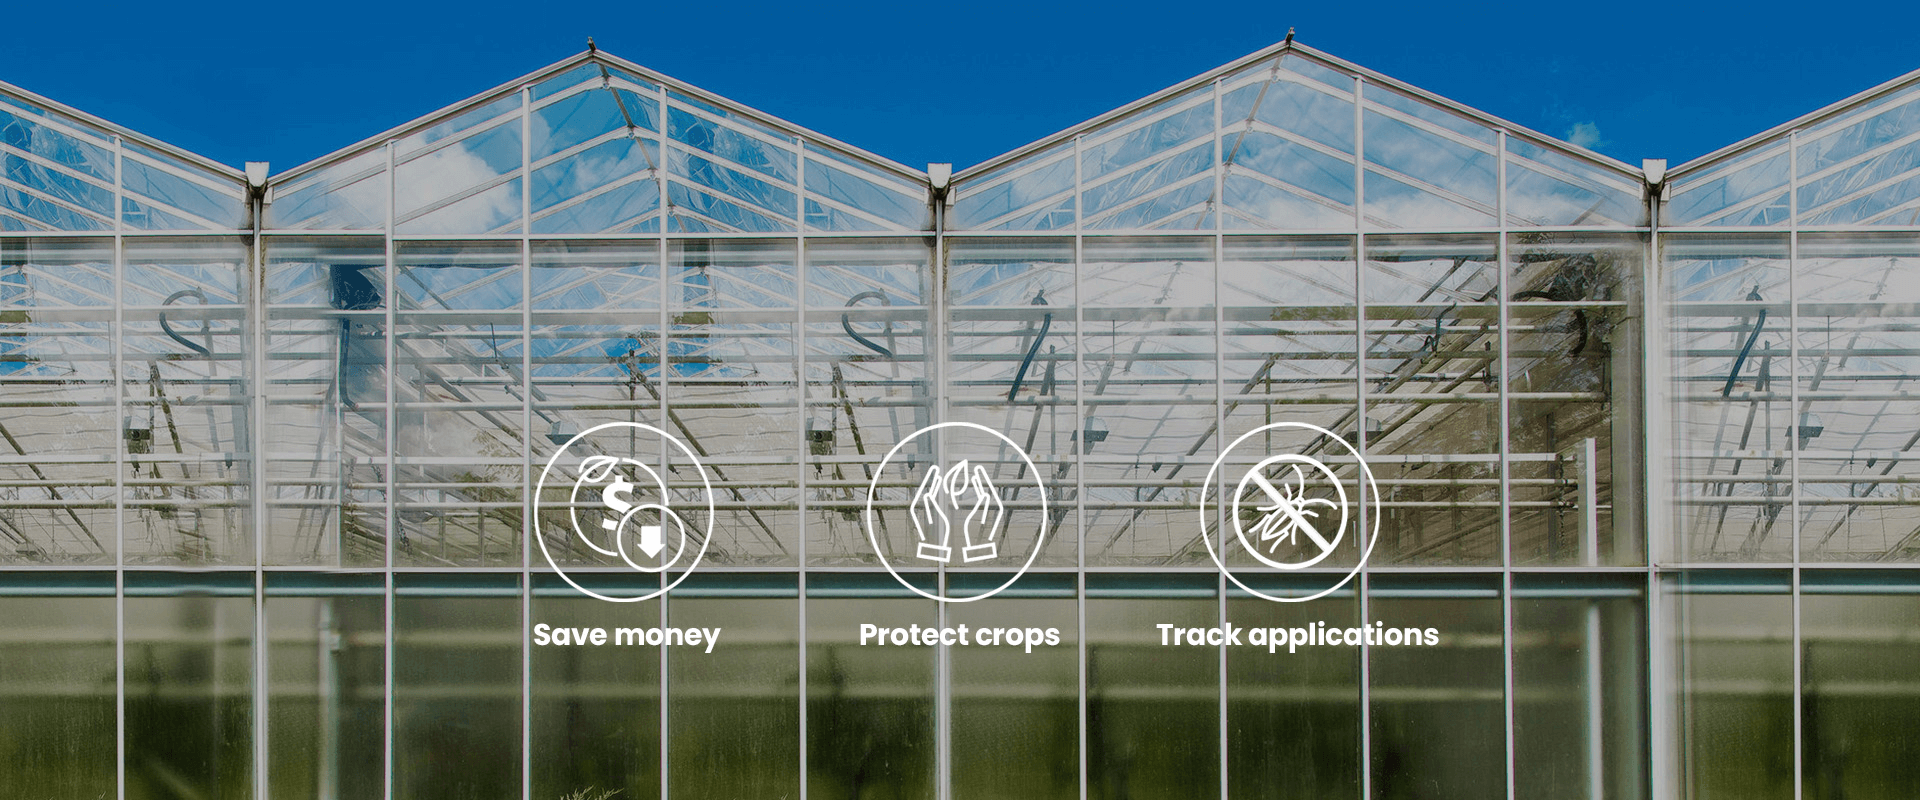 Save Money, Protect Crops, Track Applications